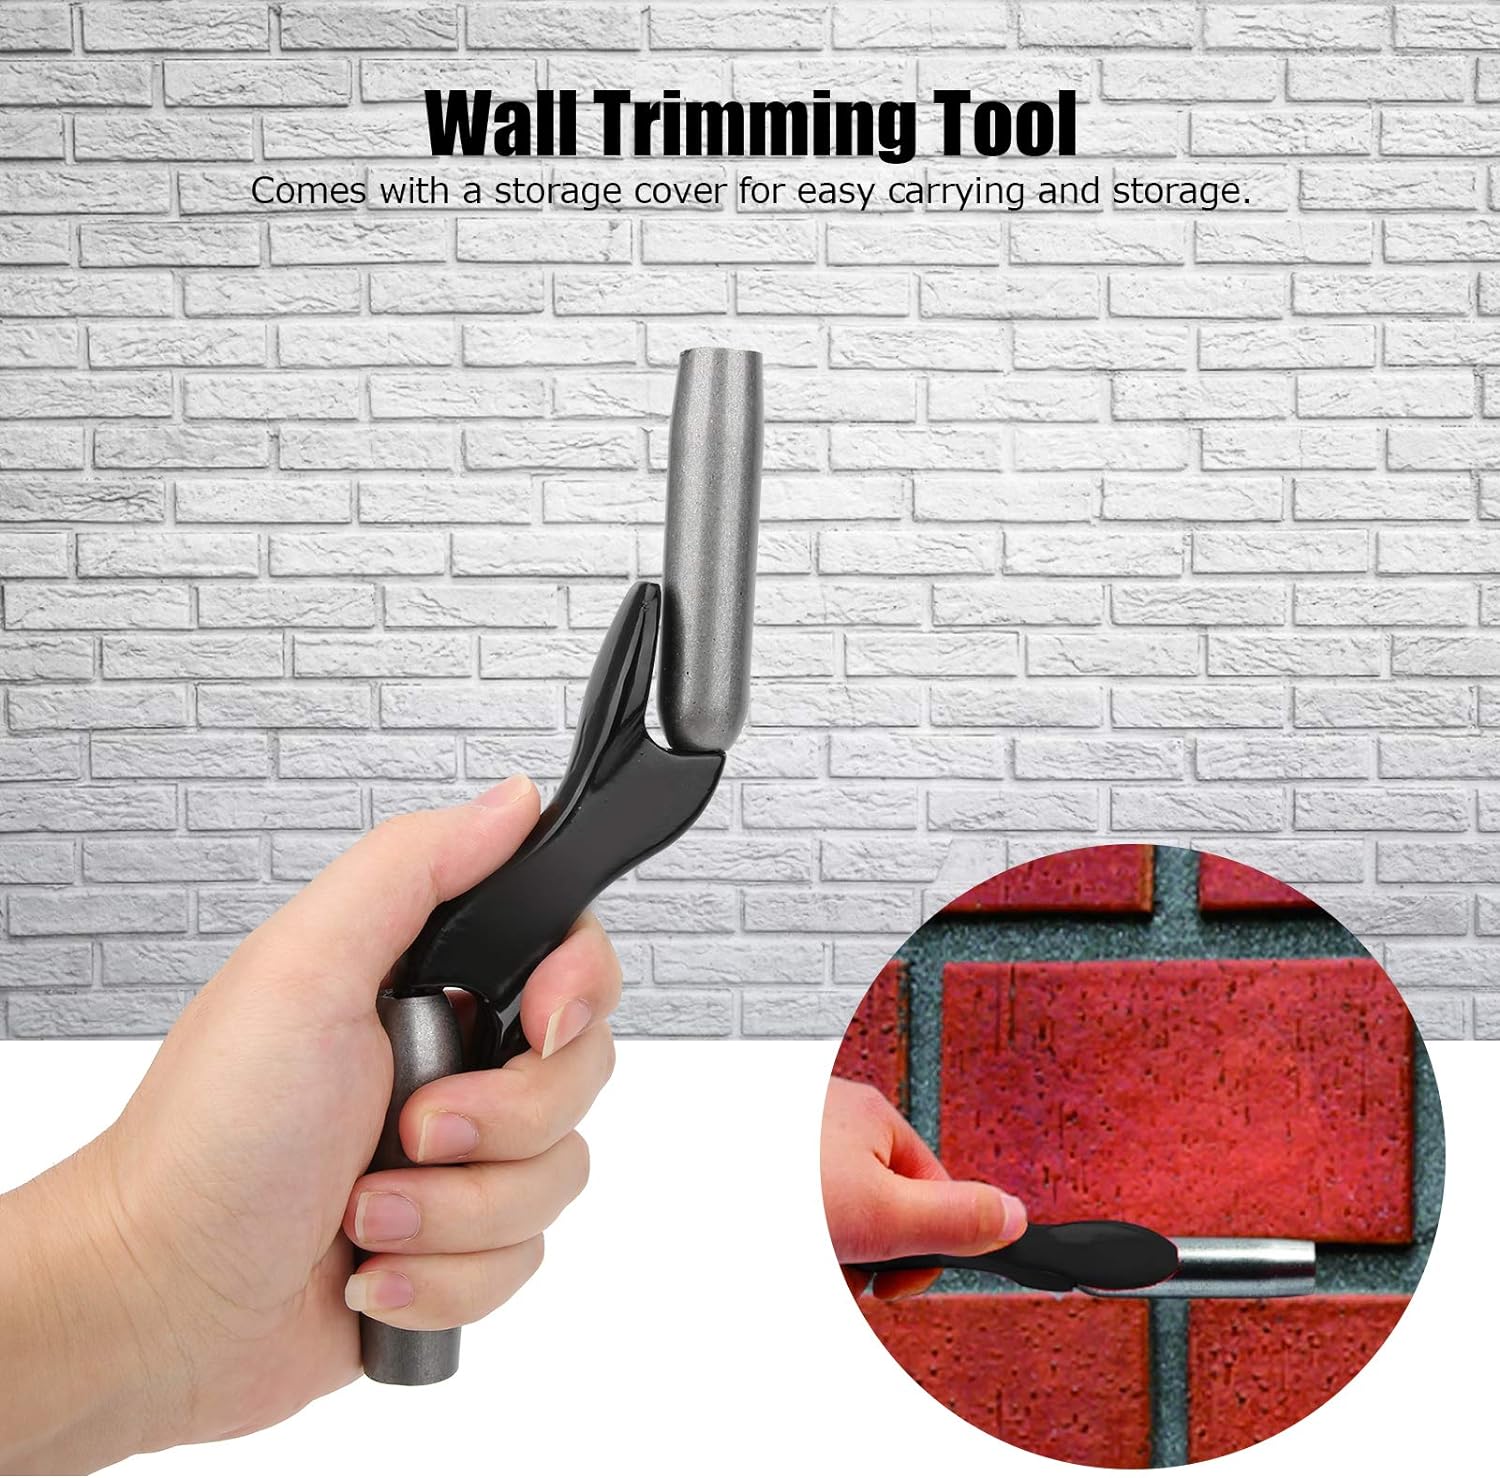 tissting Brick Jointer Metal Material Handheld Builder Trimming Tool Wall Beauty Stitcher Construction Worker Wall Laying Tools